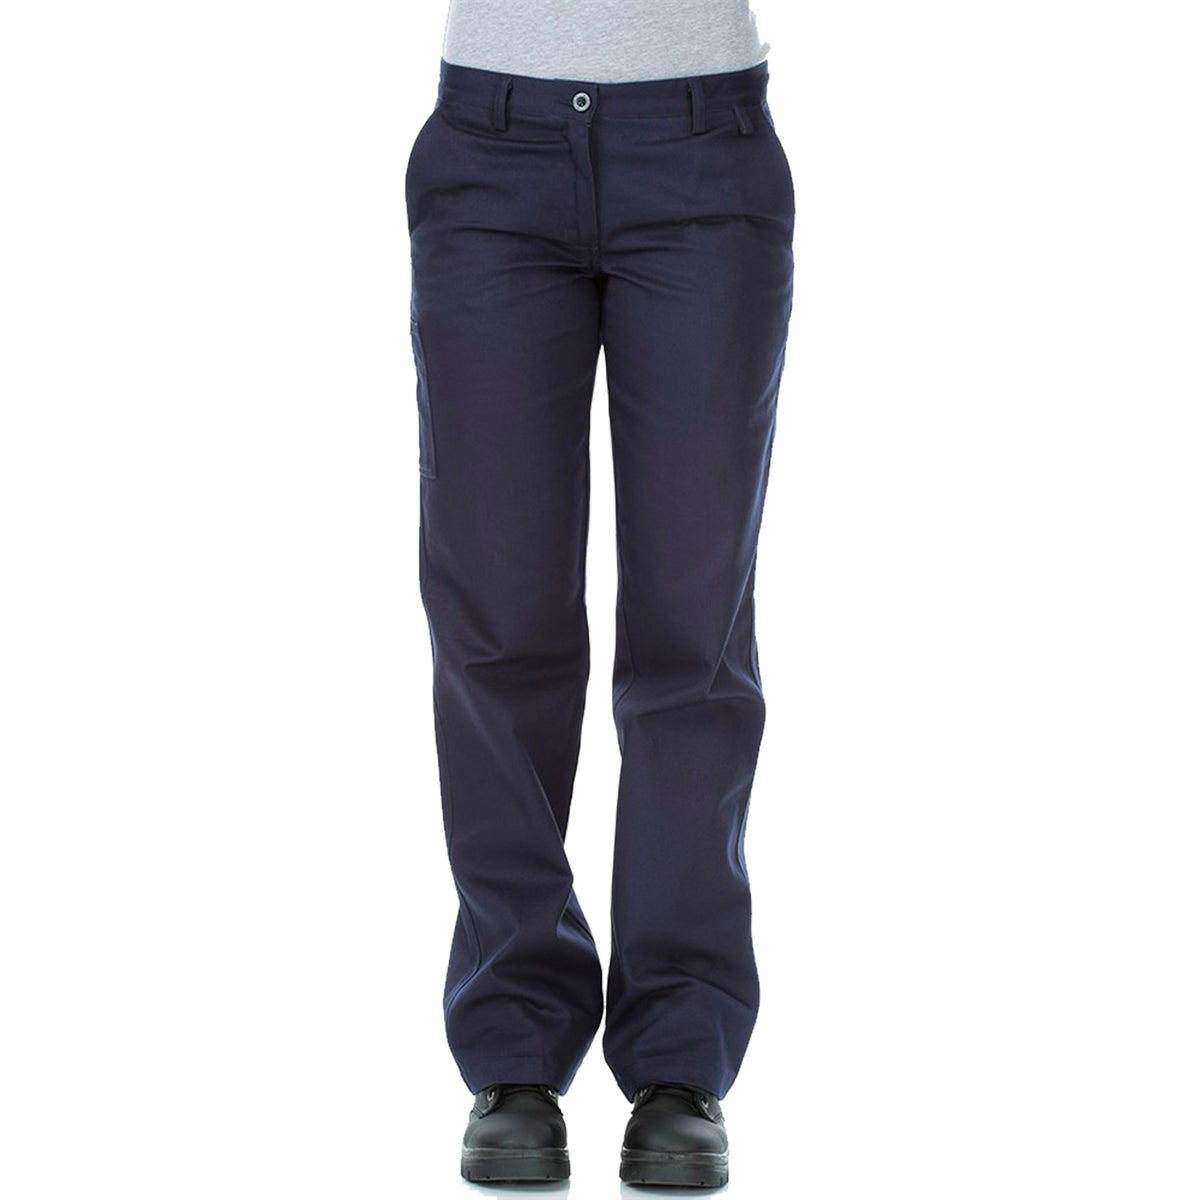 ladies cotton drill work pants in navy